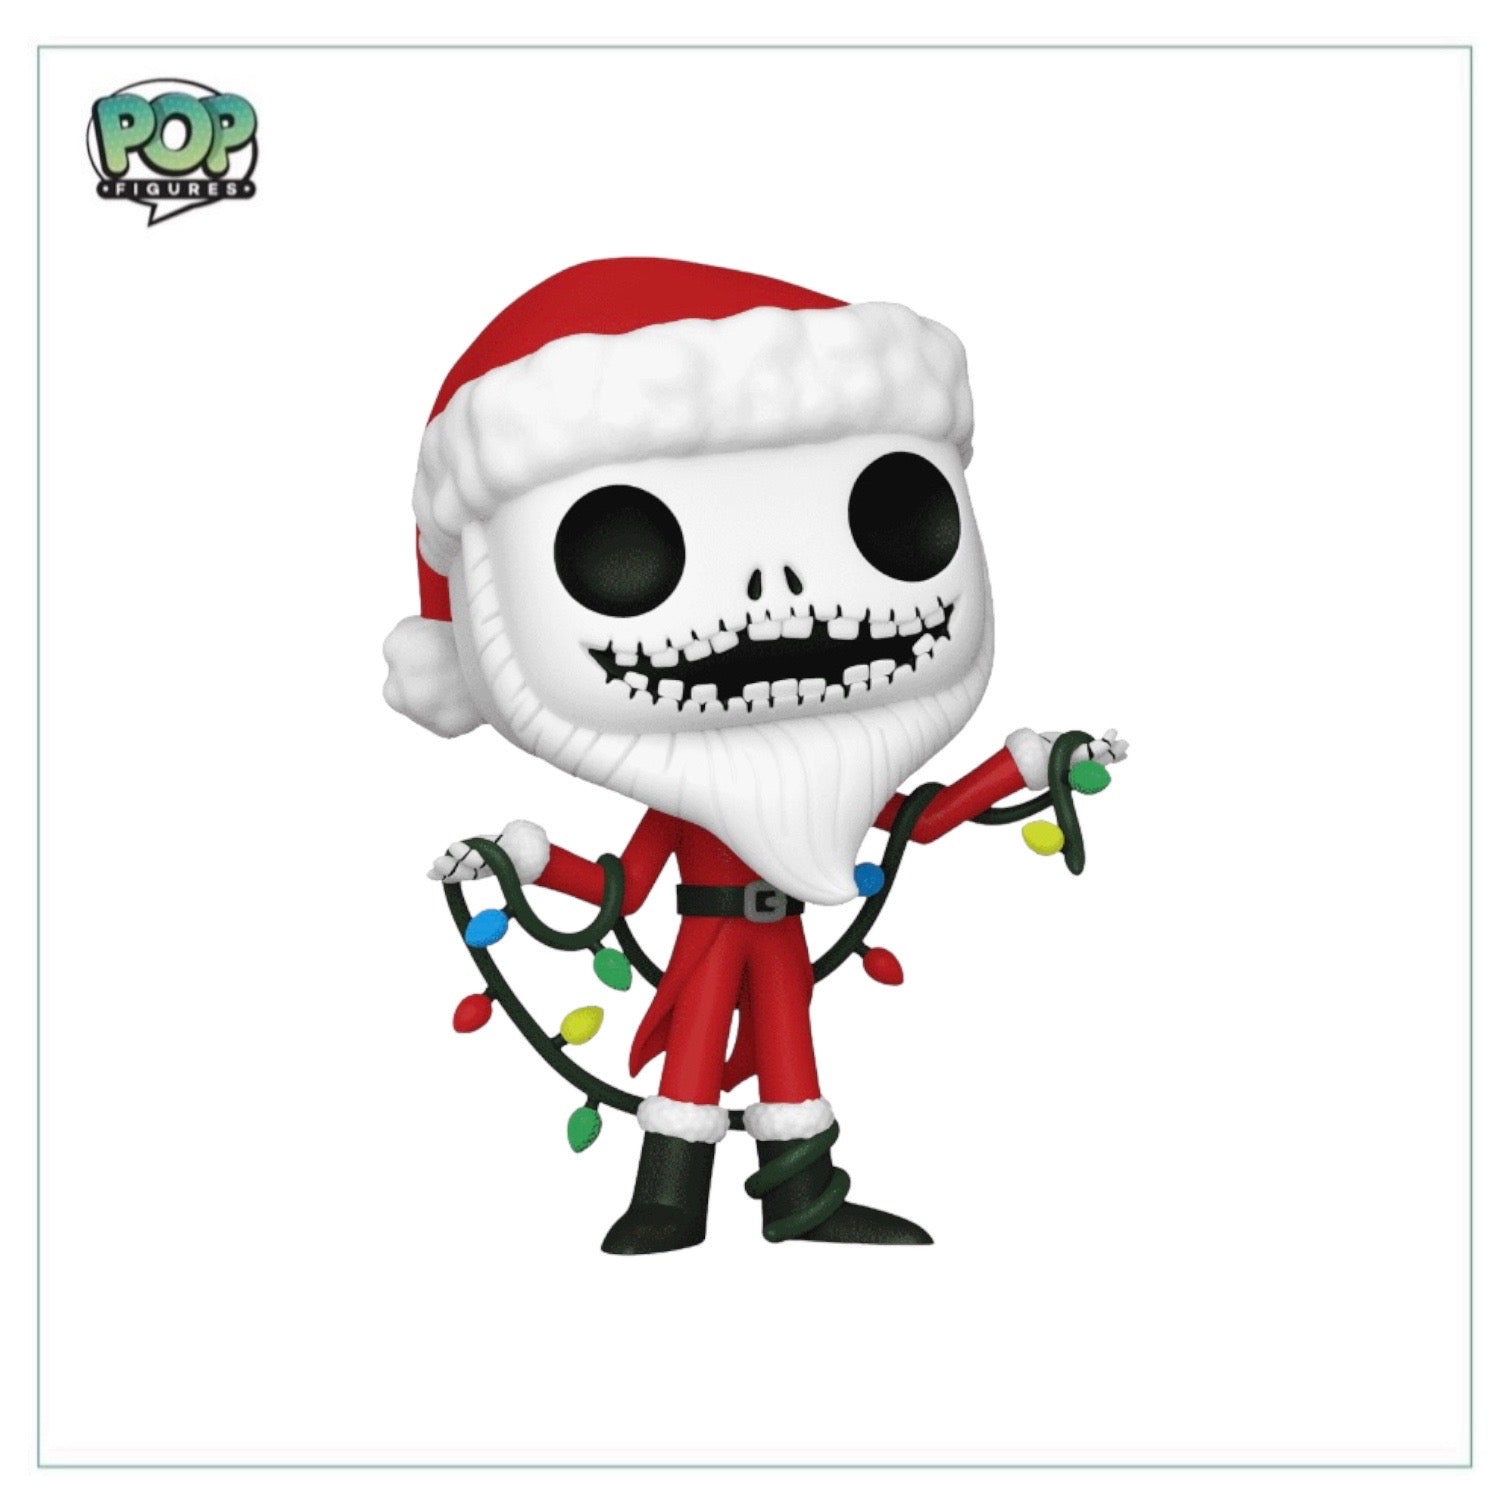 Santa Jack #1383 (Scented) Funko Pop! - The Nightmare Before Christmas - Entertainment Earth Exclusive